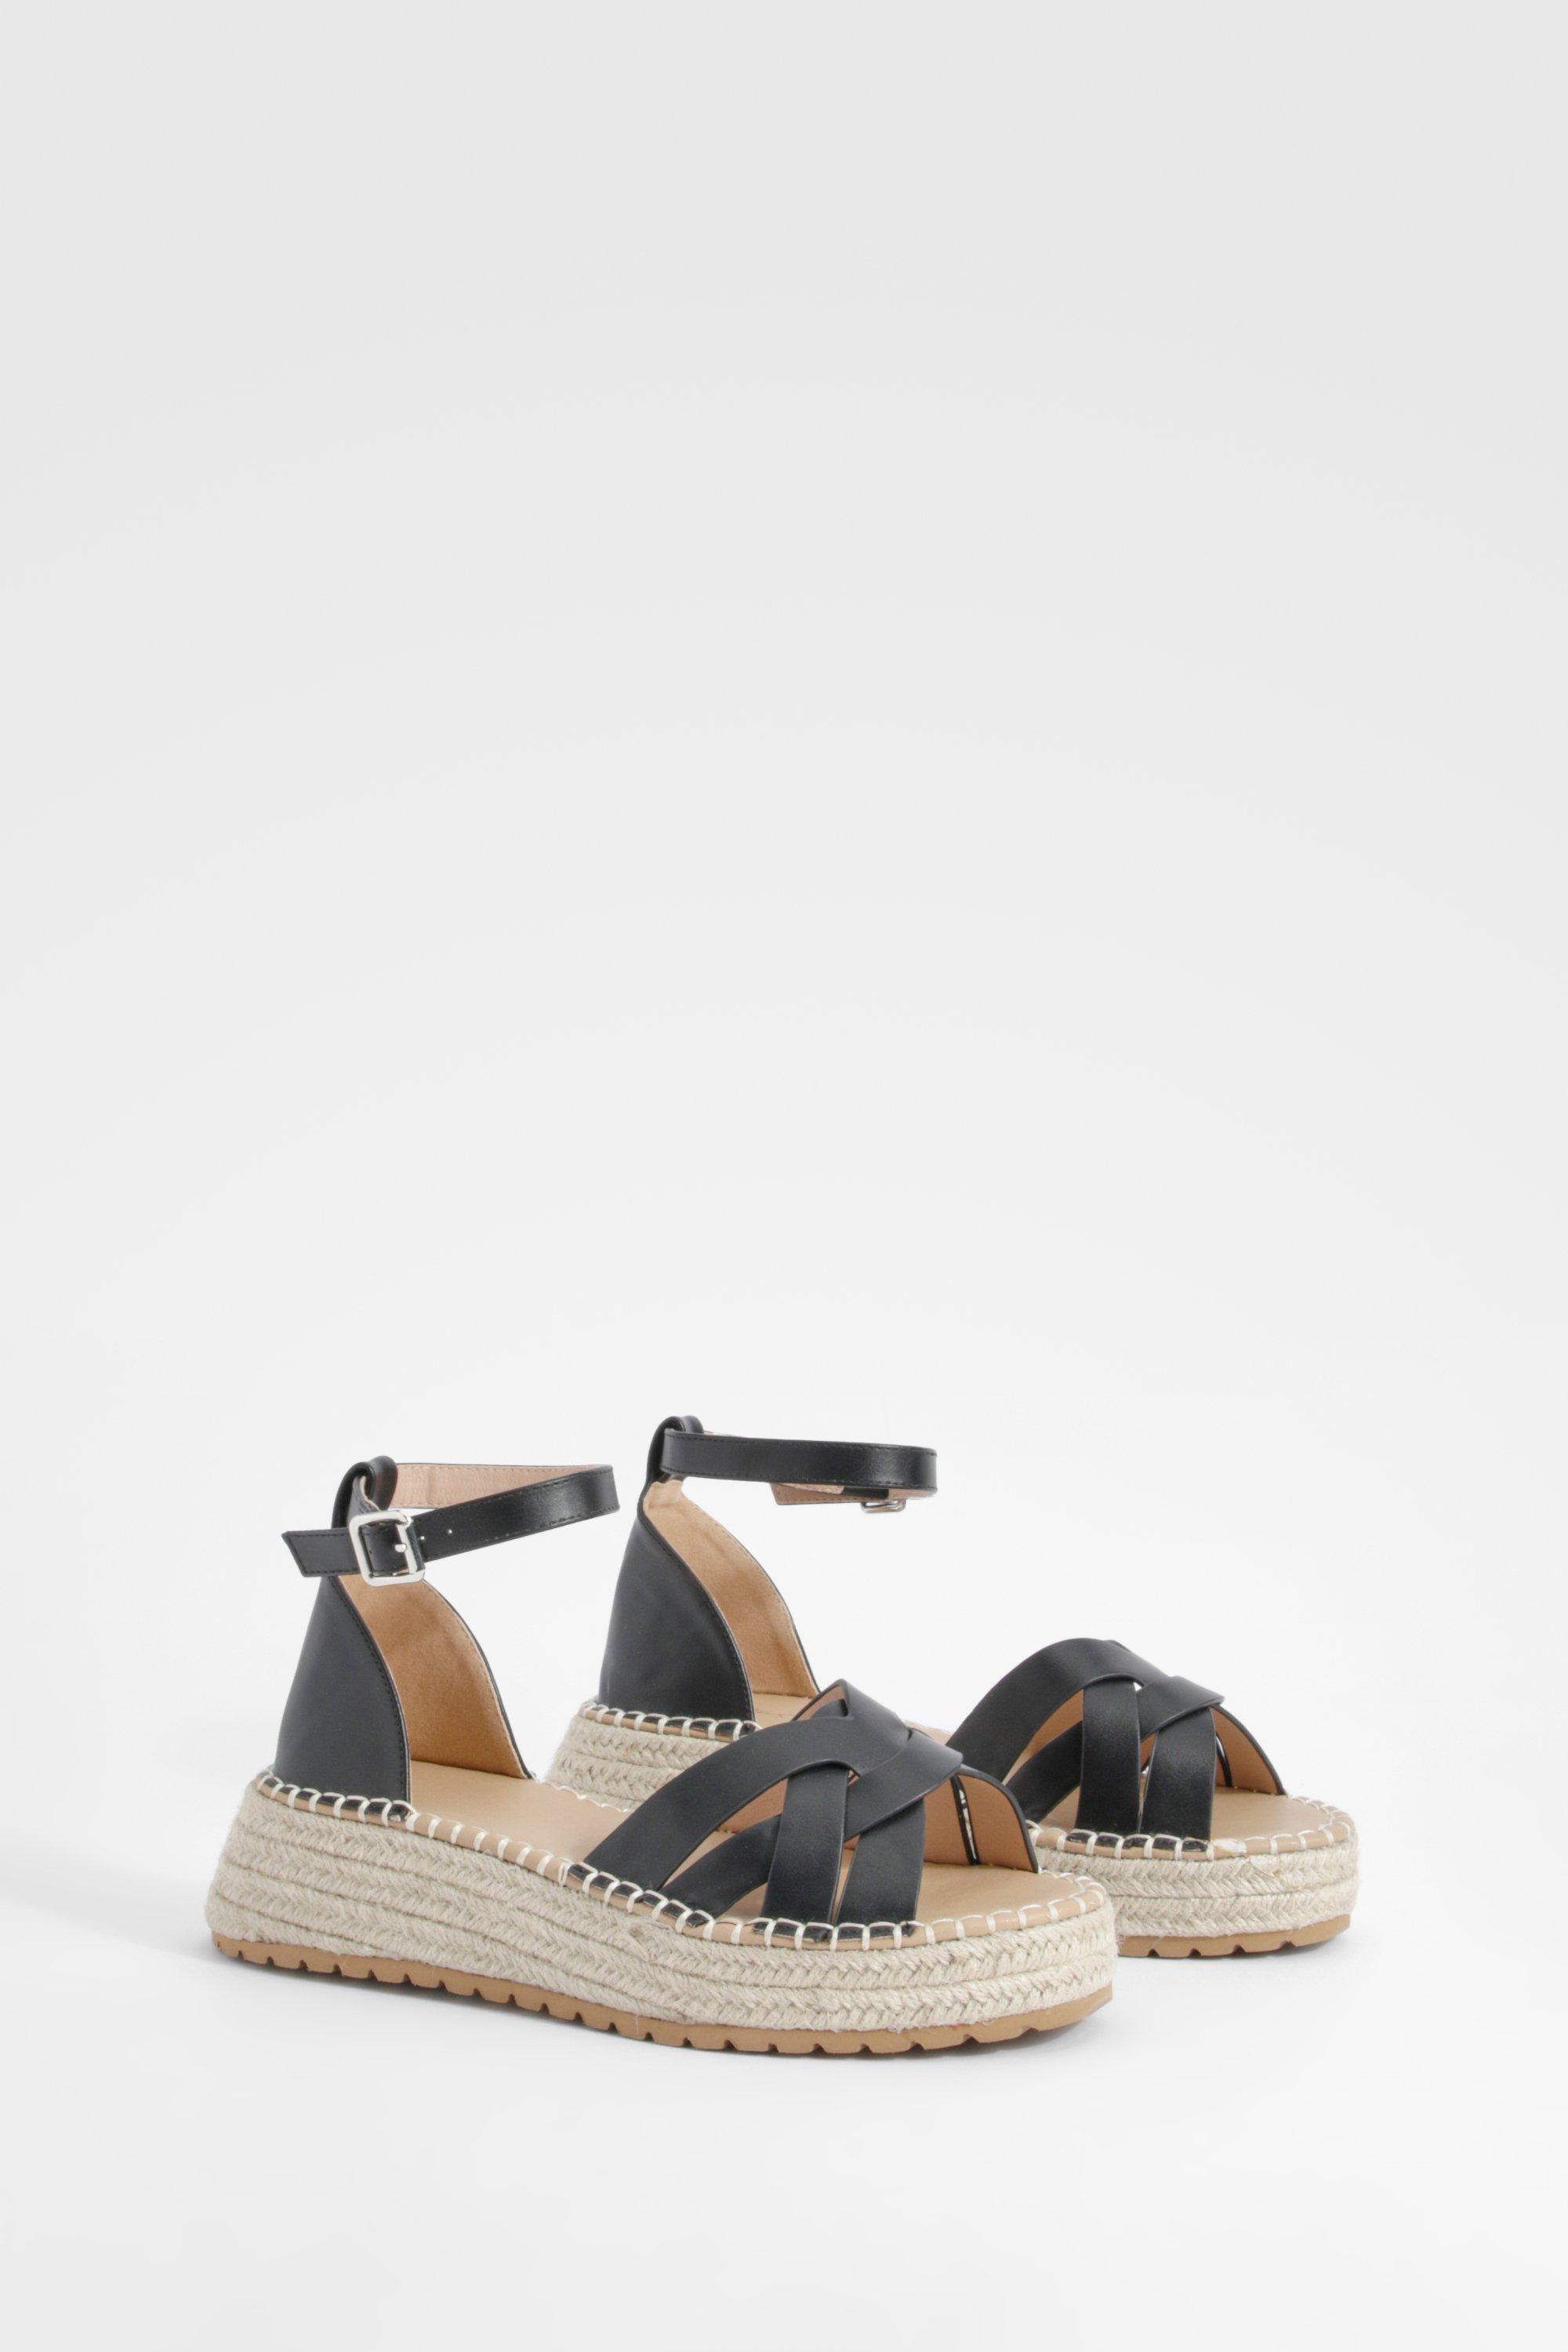 Image of Wide Fit Low Woven Flatform Sandals, Nero